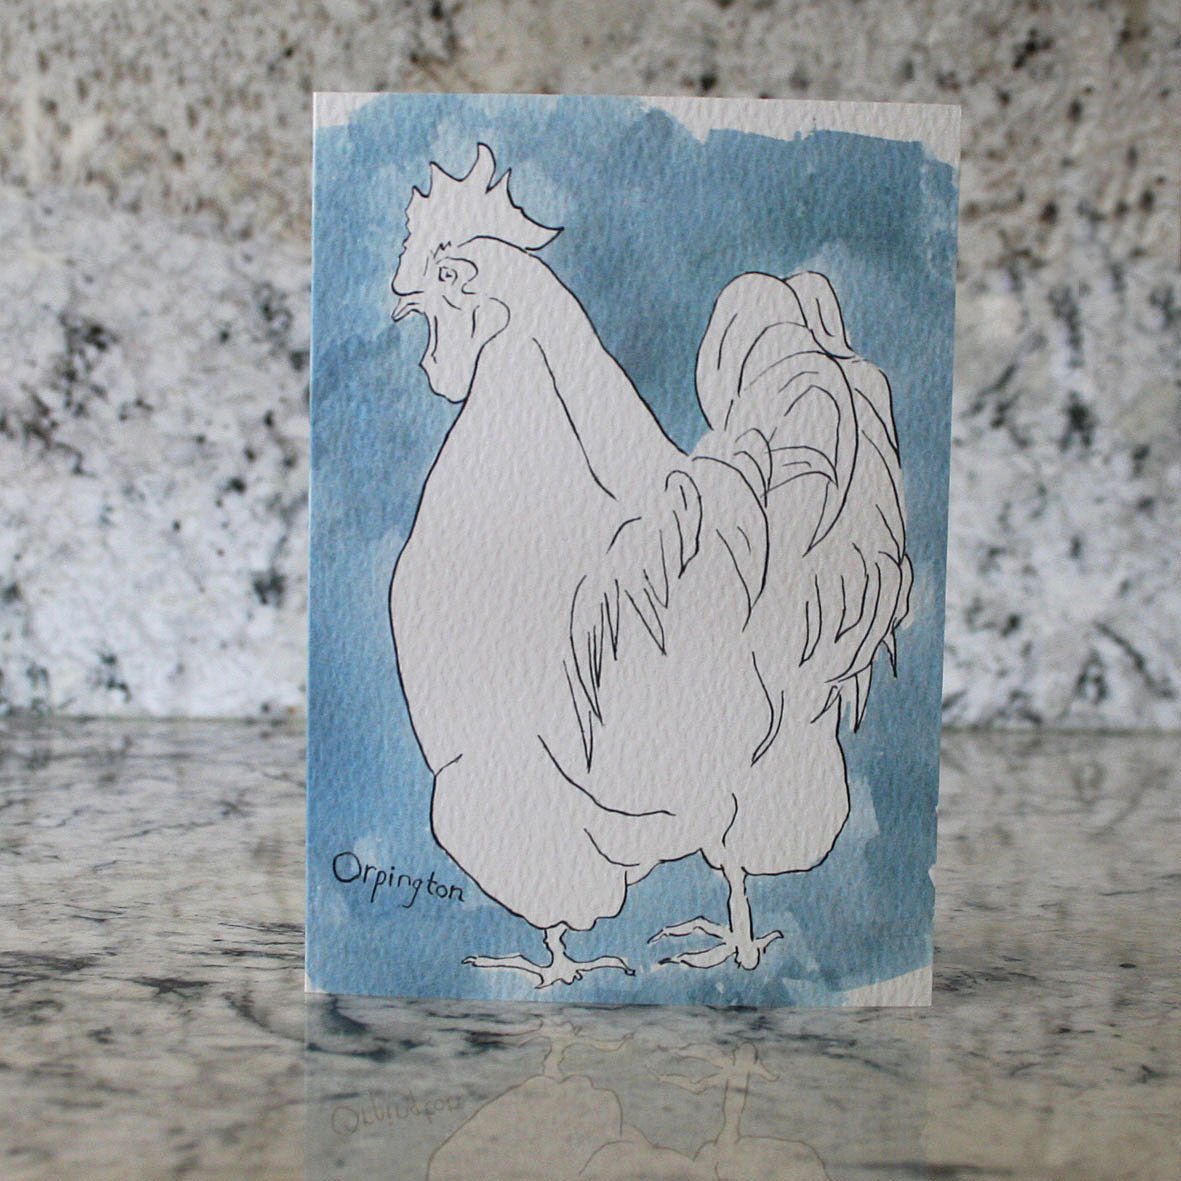 Box Set of 8 Hens Cards